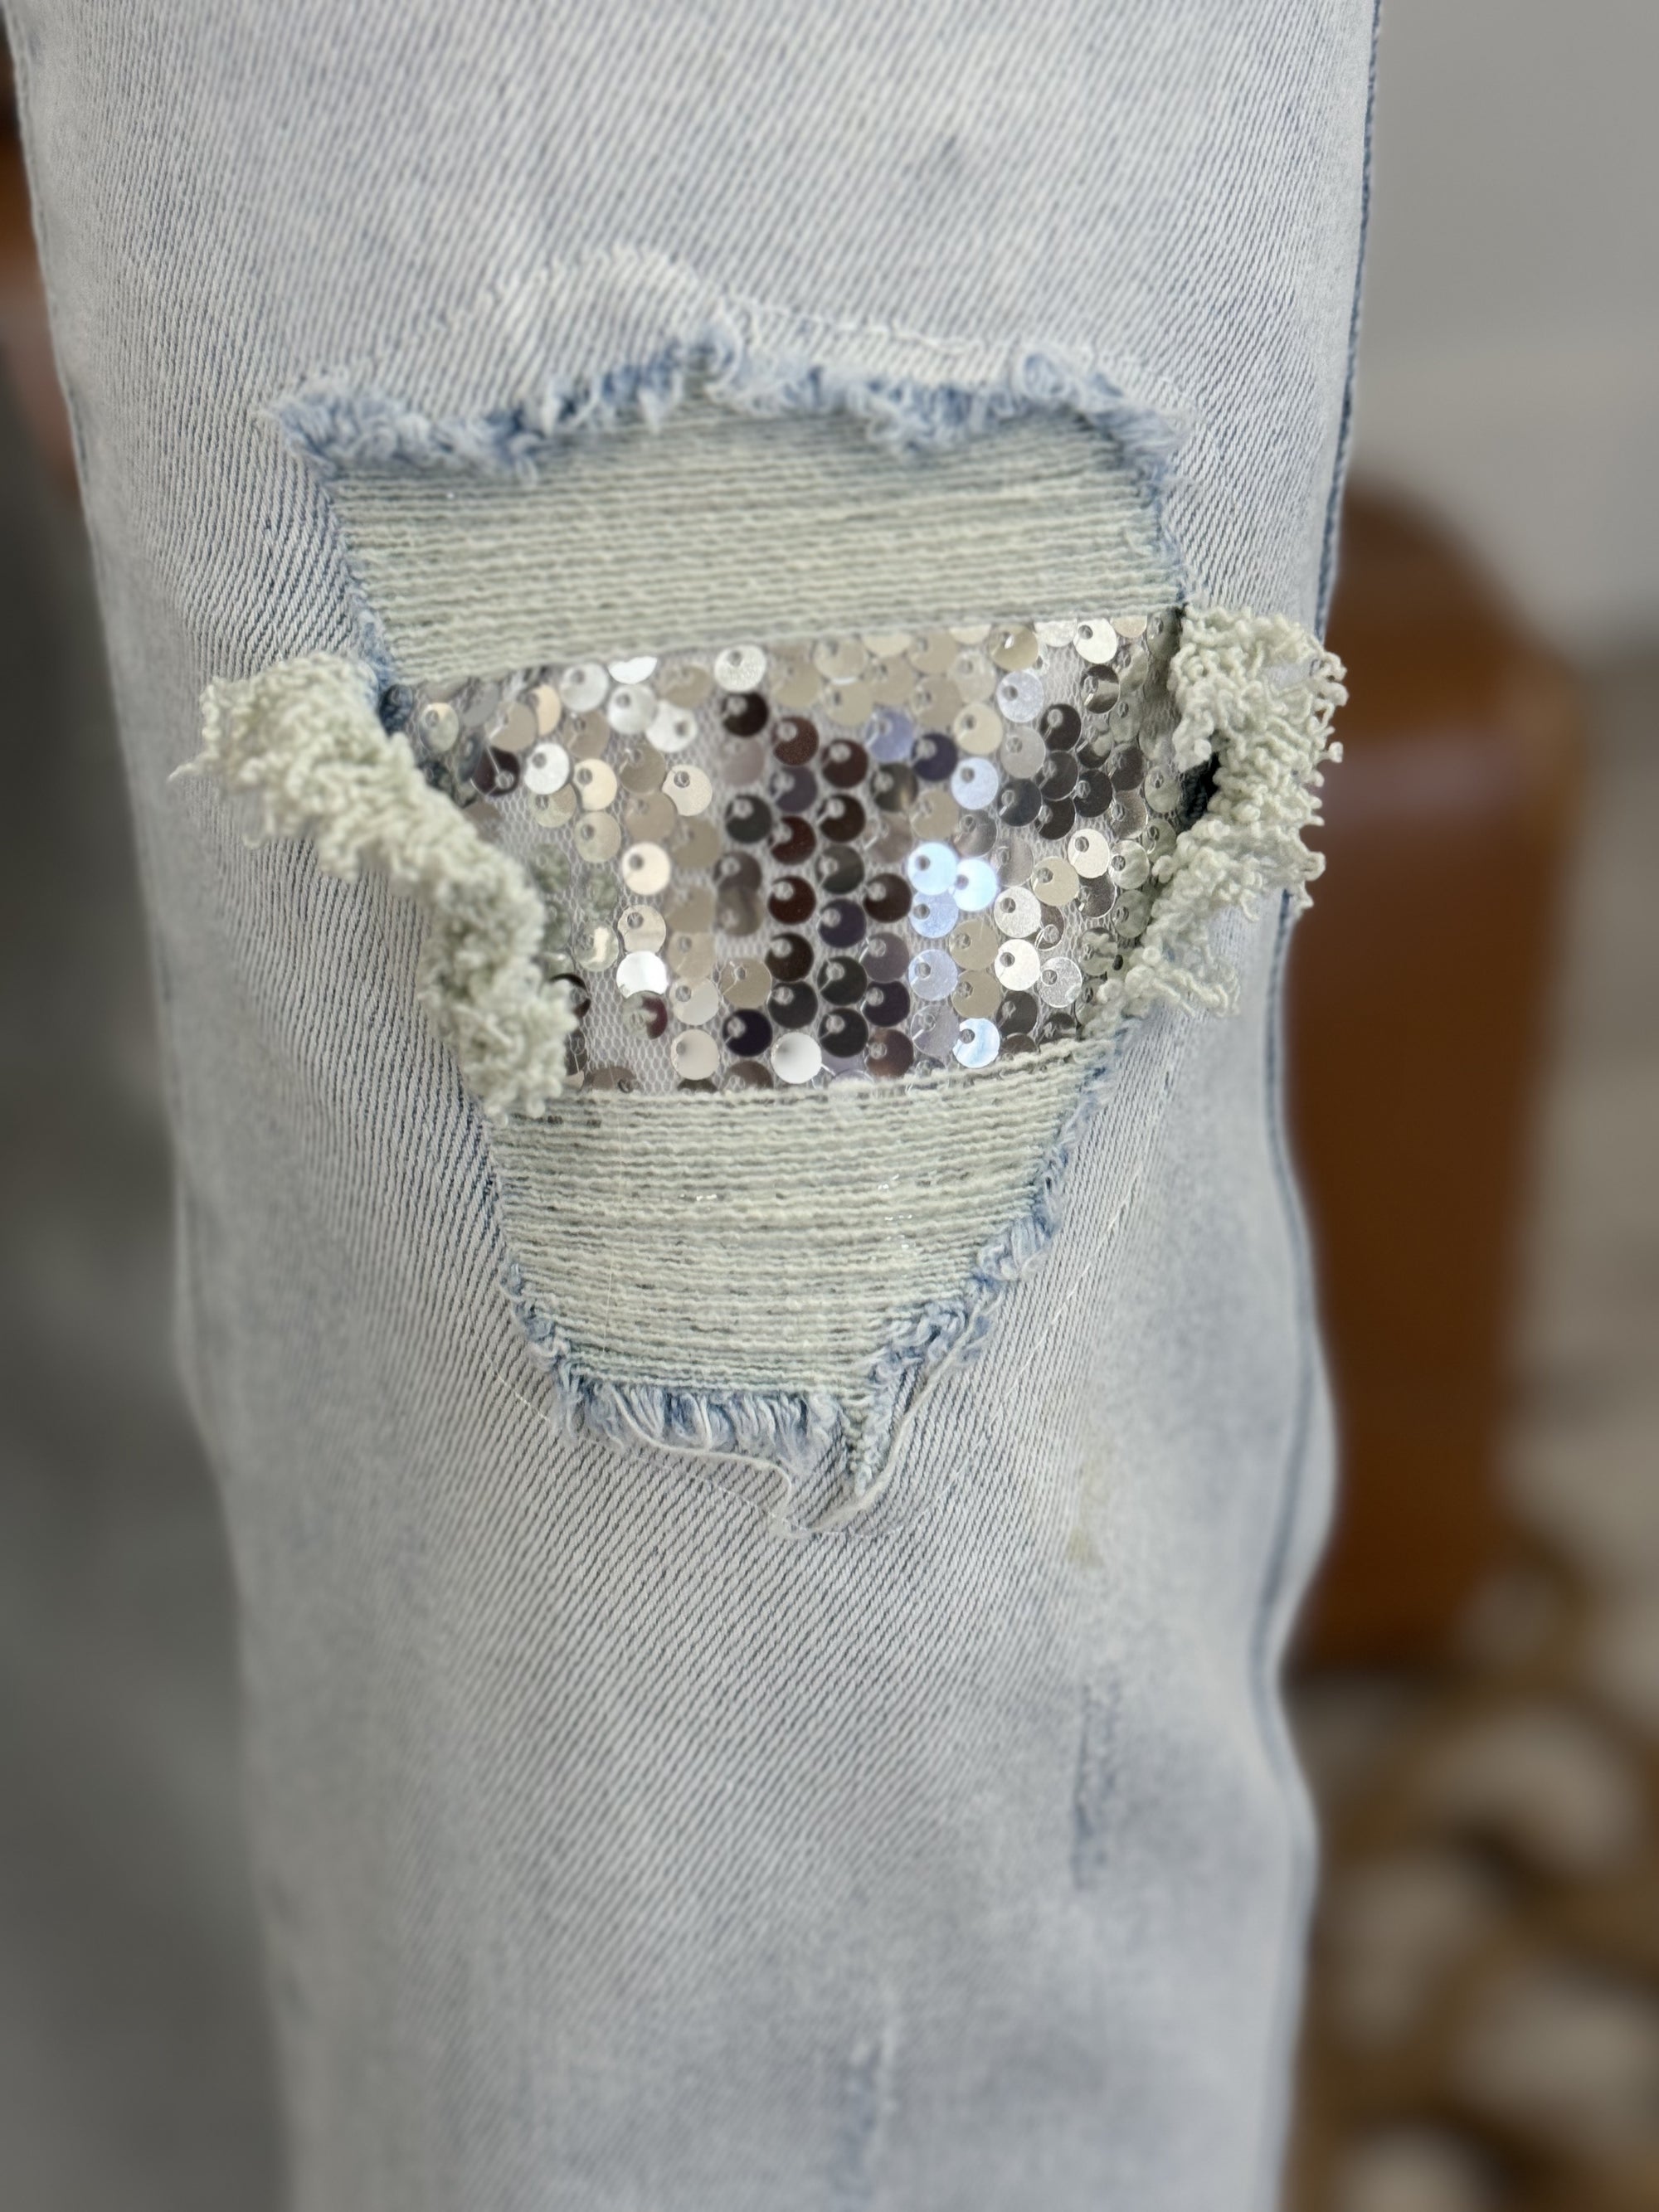 High Rise Sequin Patch Jeans